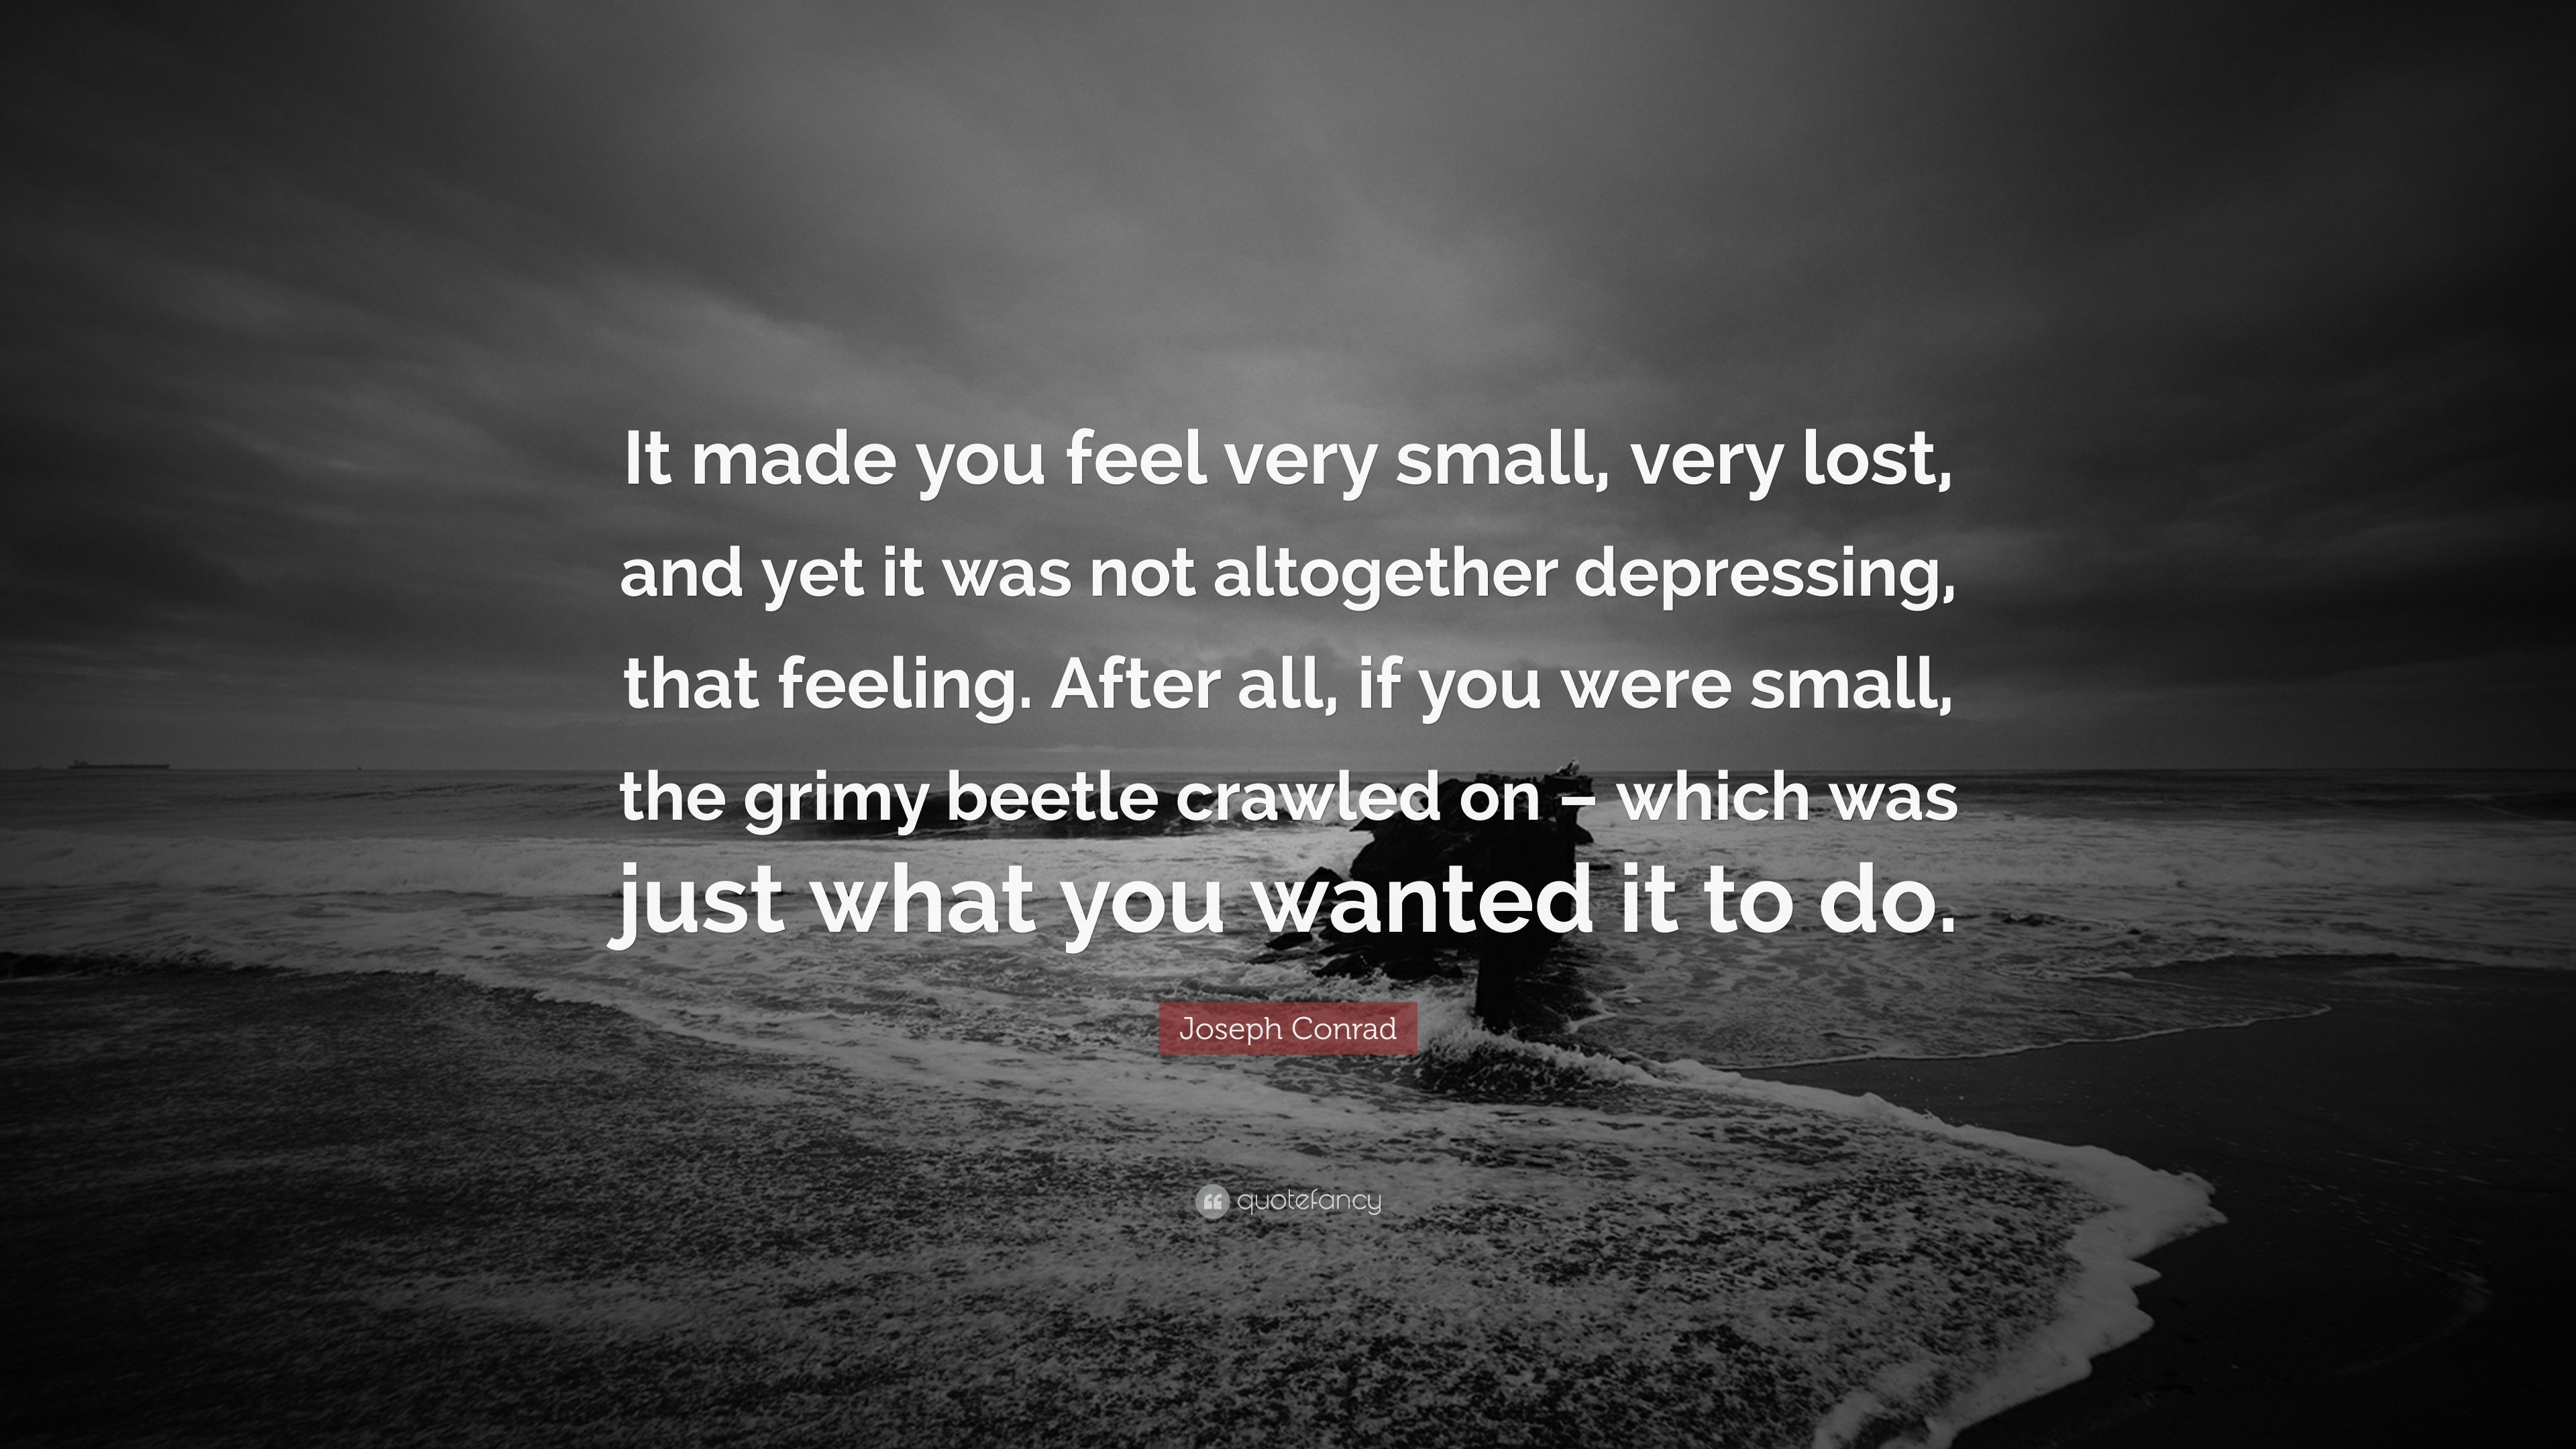 Joseph Conrad Quote: “It made you feel very small, very lost, and ...